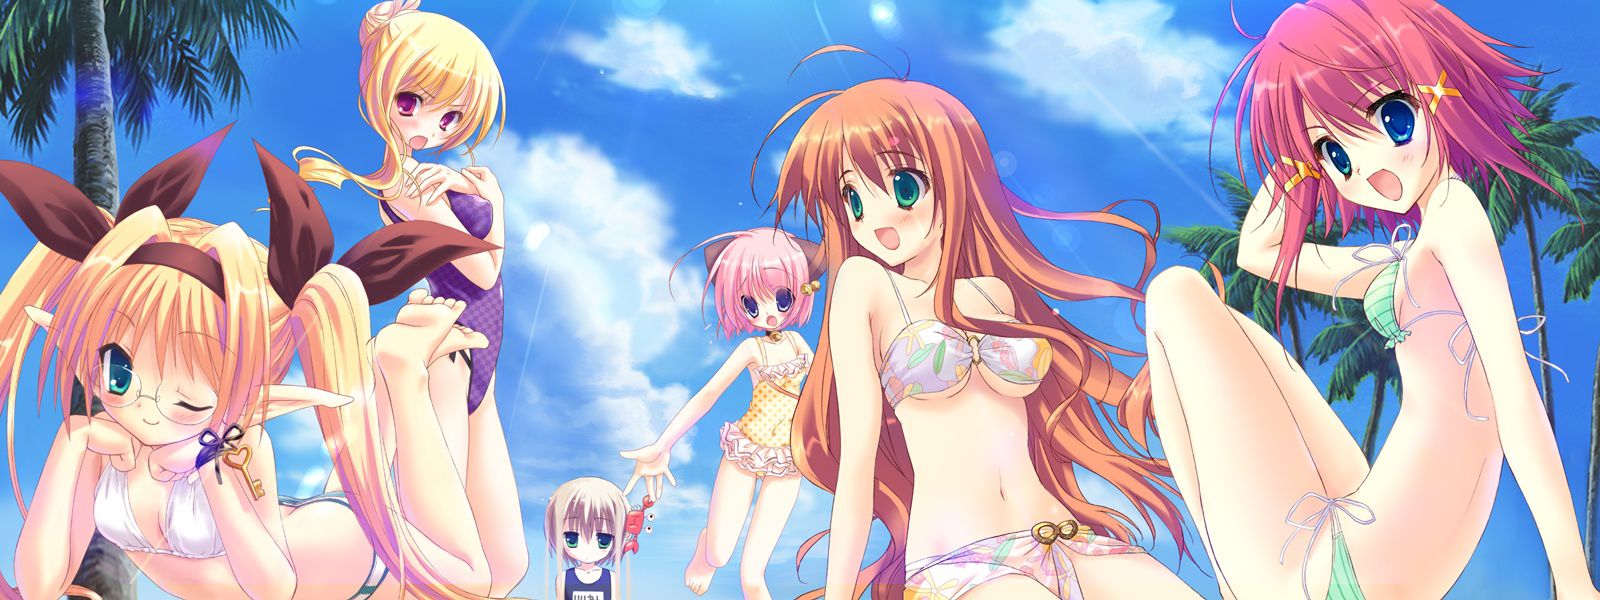 WIZARD GIRL AMBITIOUS [HCG 18 eroge] wallpapers, images 1